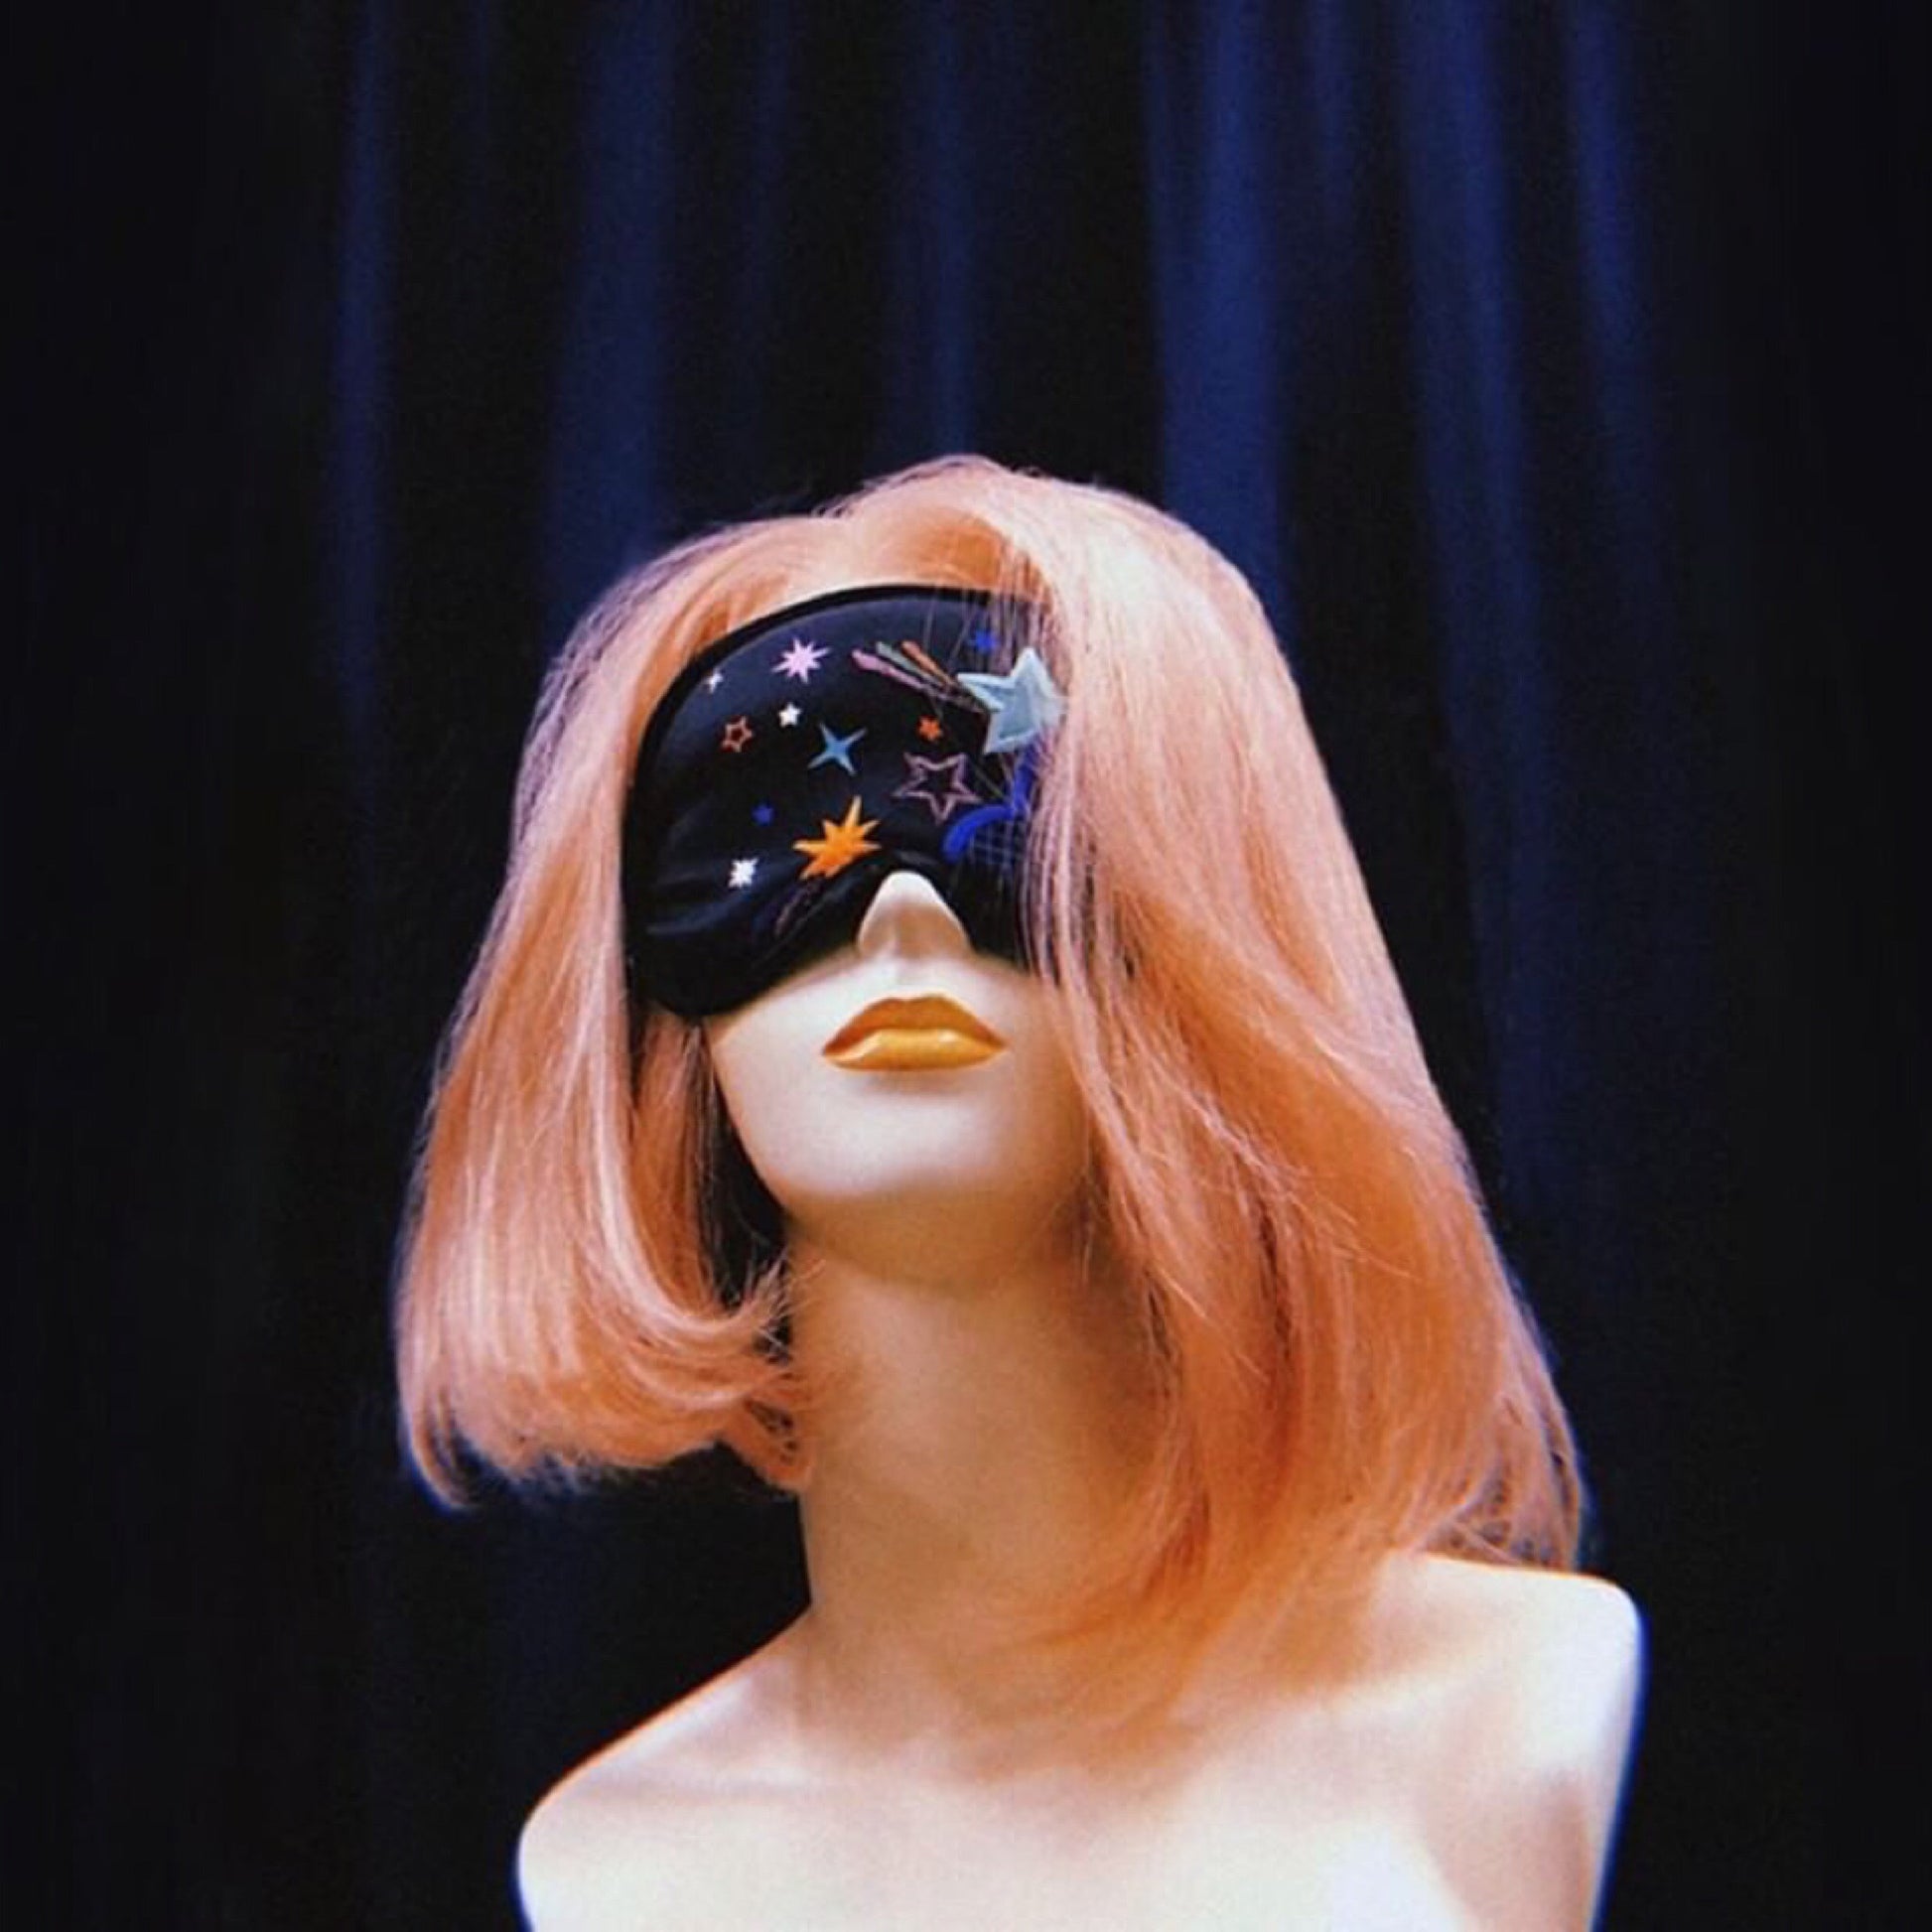 Disco nap eye mask on a plastic mannequin head with shoulders just visible. The mannequin has pink hair and is seen in front of a dark navy curtain